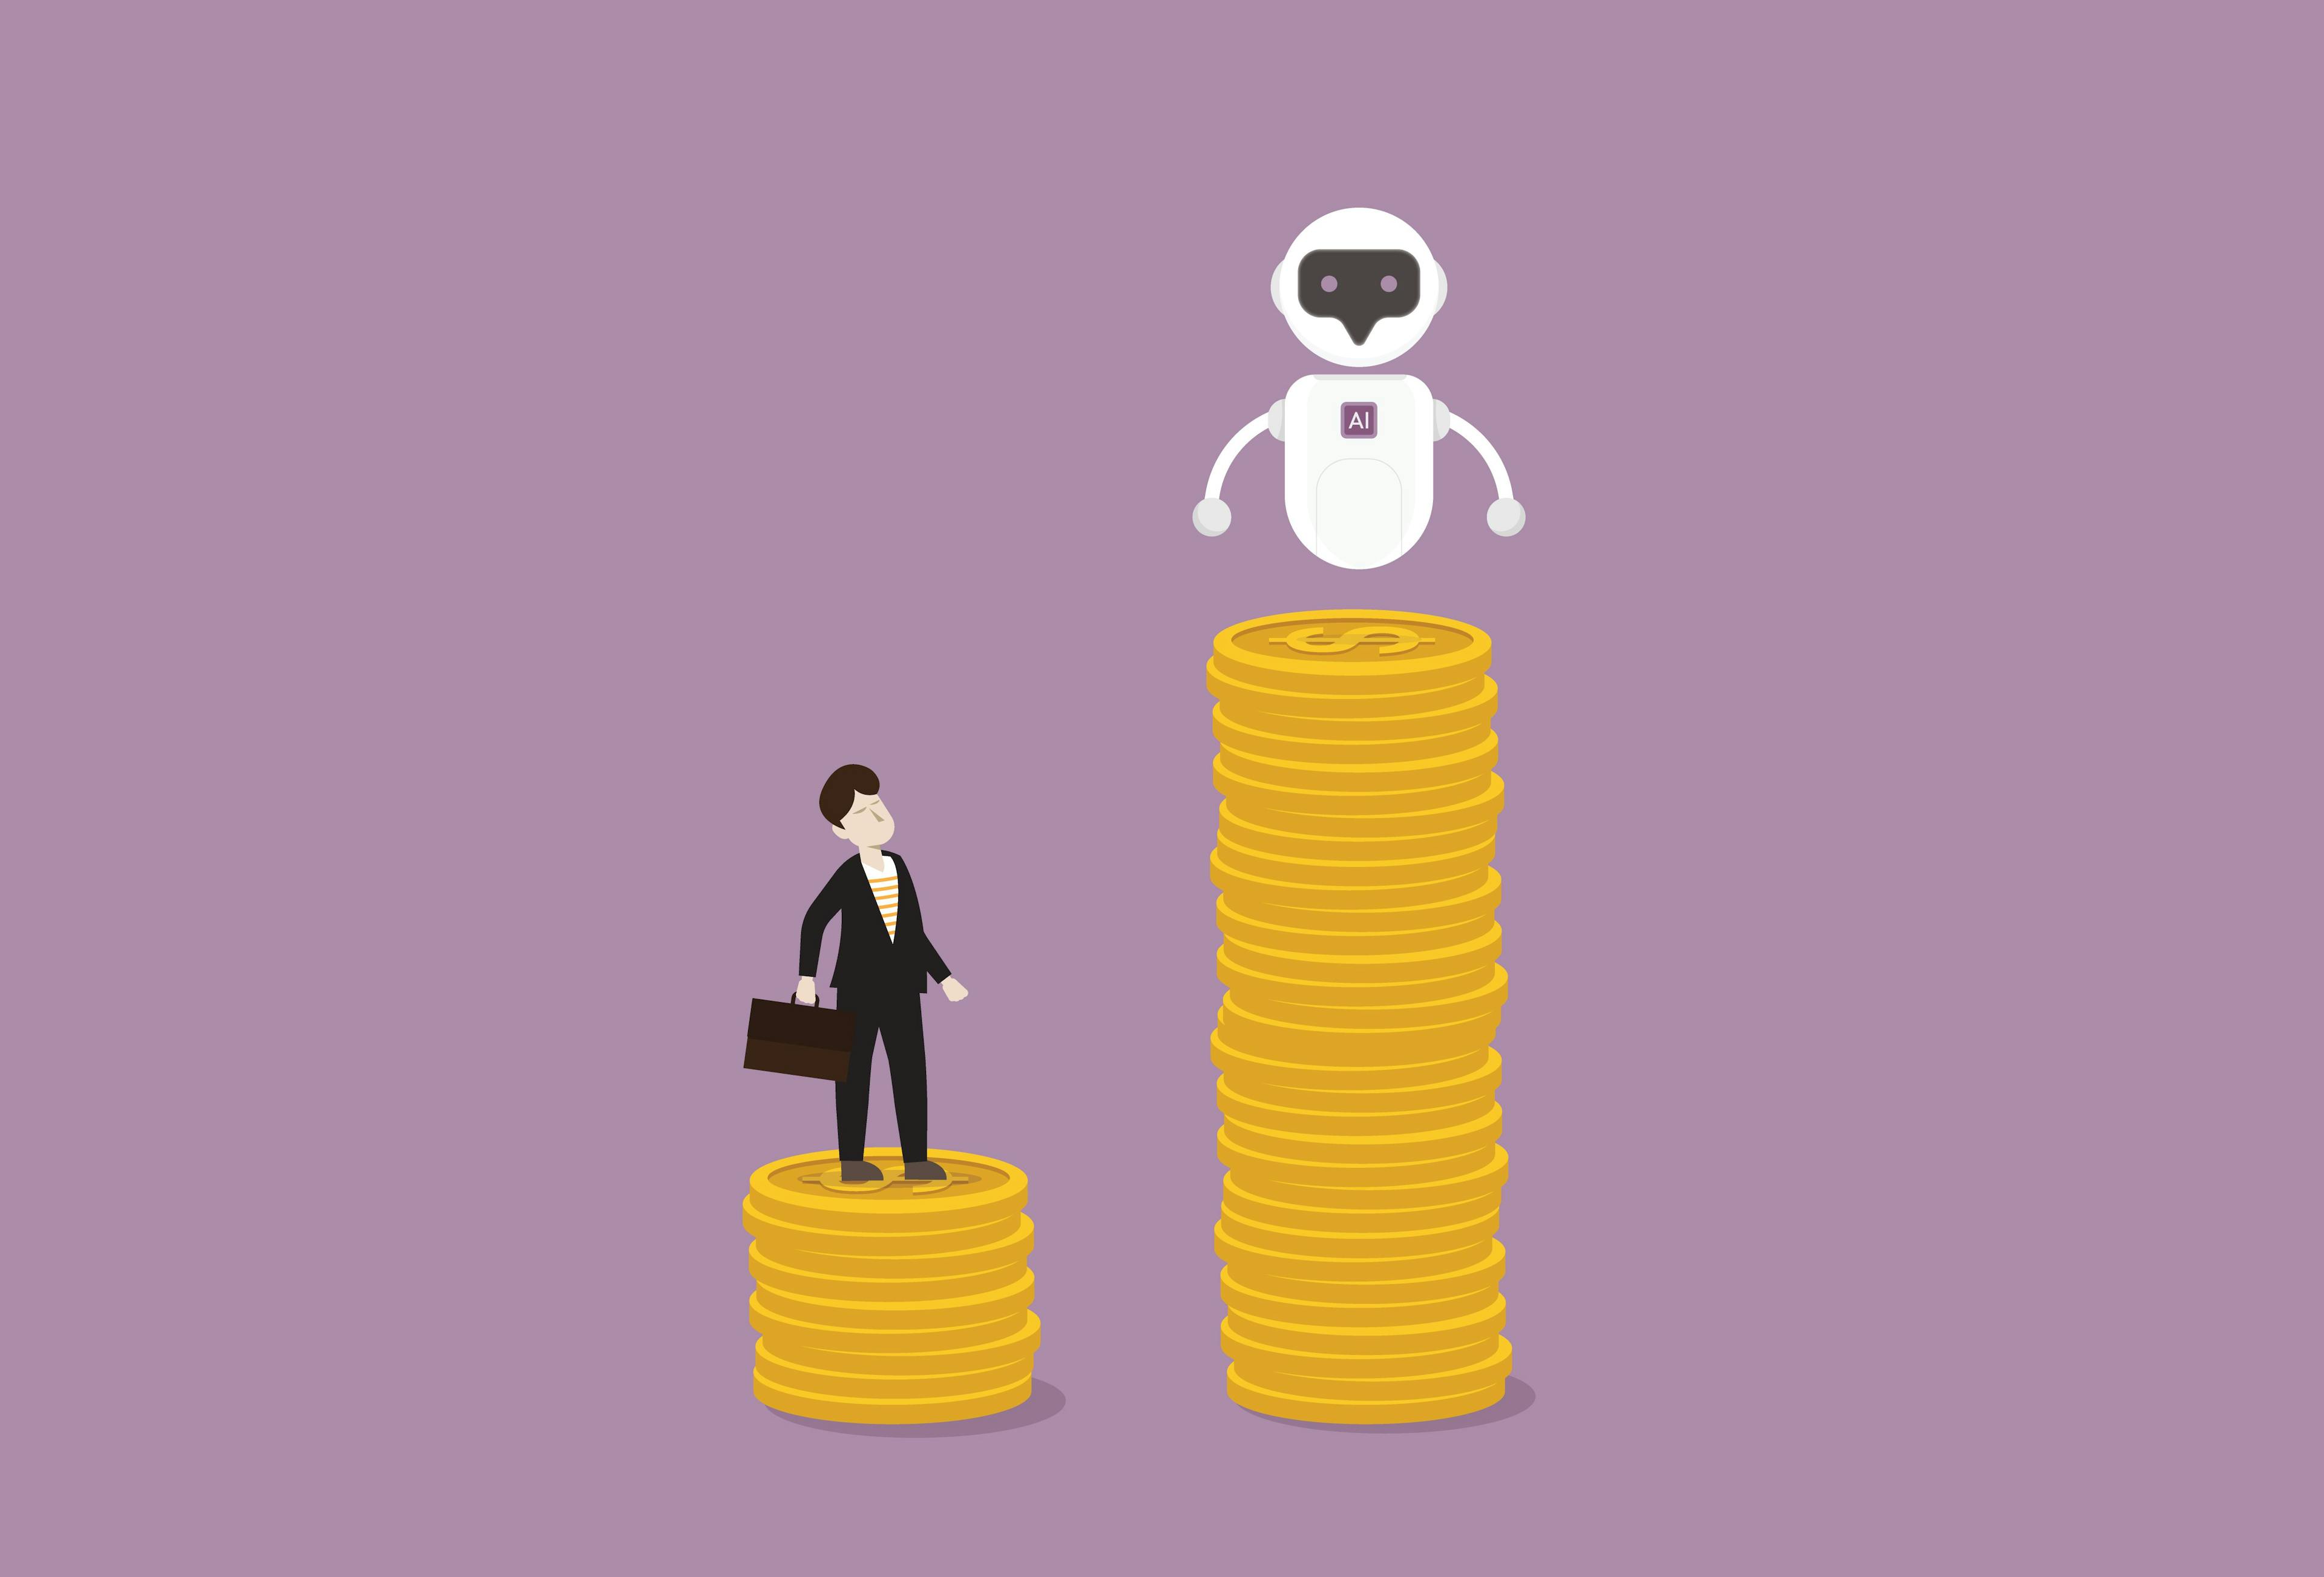 Illustration of a robot and a human standing on top of coins.